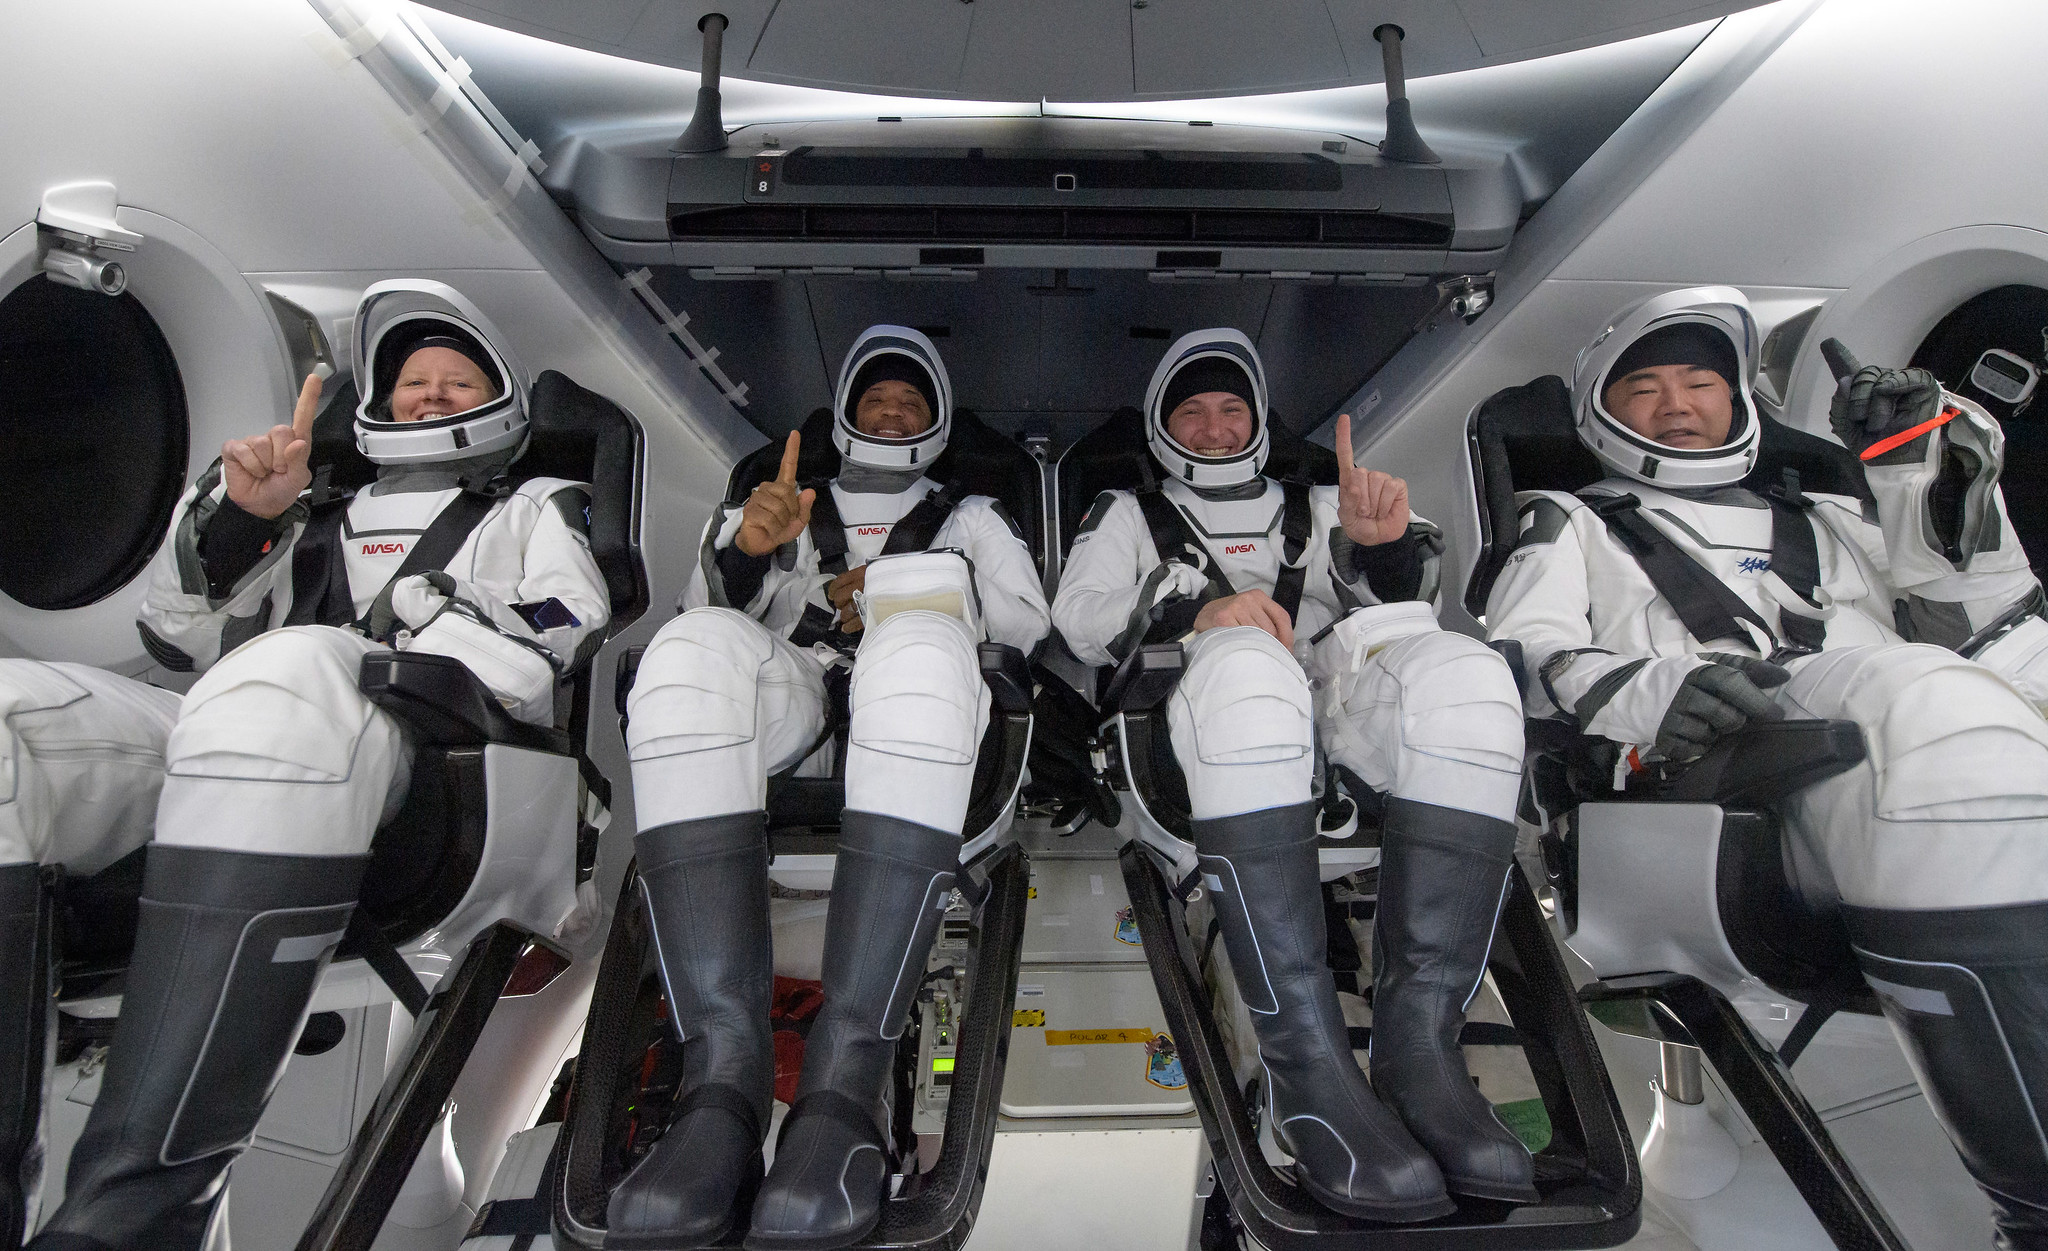 From left, NASA astronauts Shannon Walker, Victor Glover and Mike Hopkins, and Japan Aerospace Exploration Agency (JAXA) astronaut Soichi Noguchi are seen inside the SpaceX Crew Dragon 